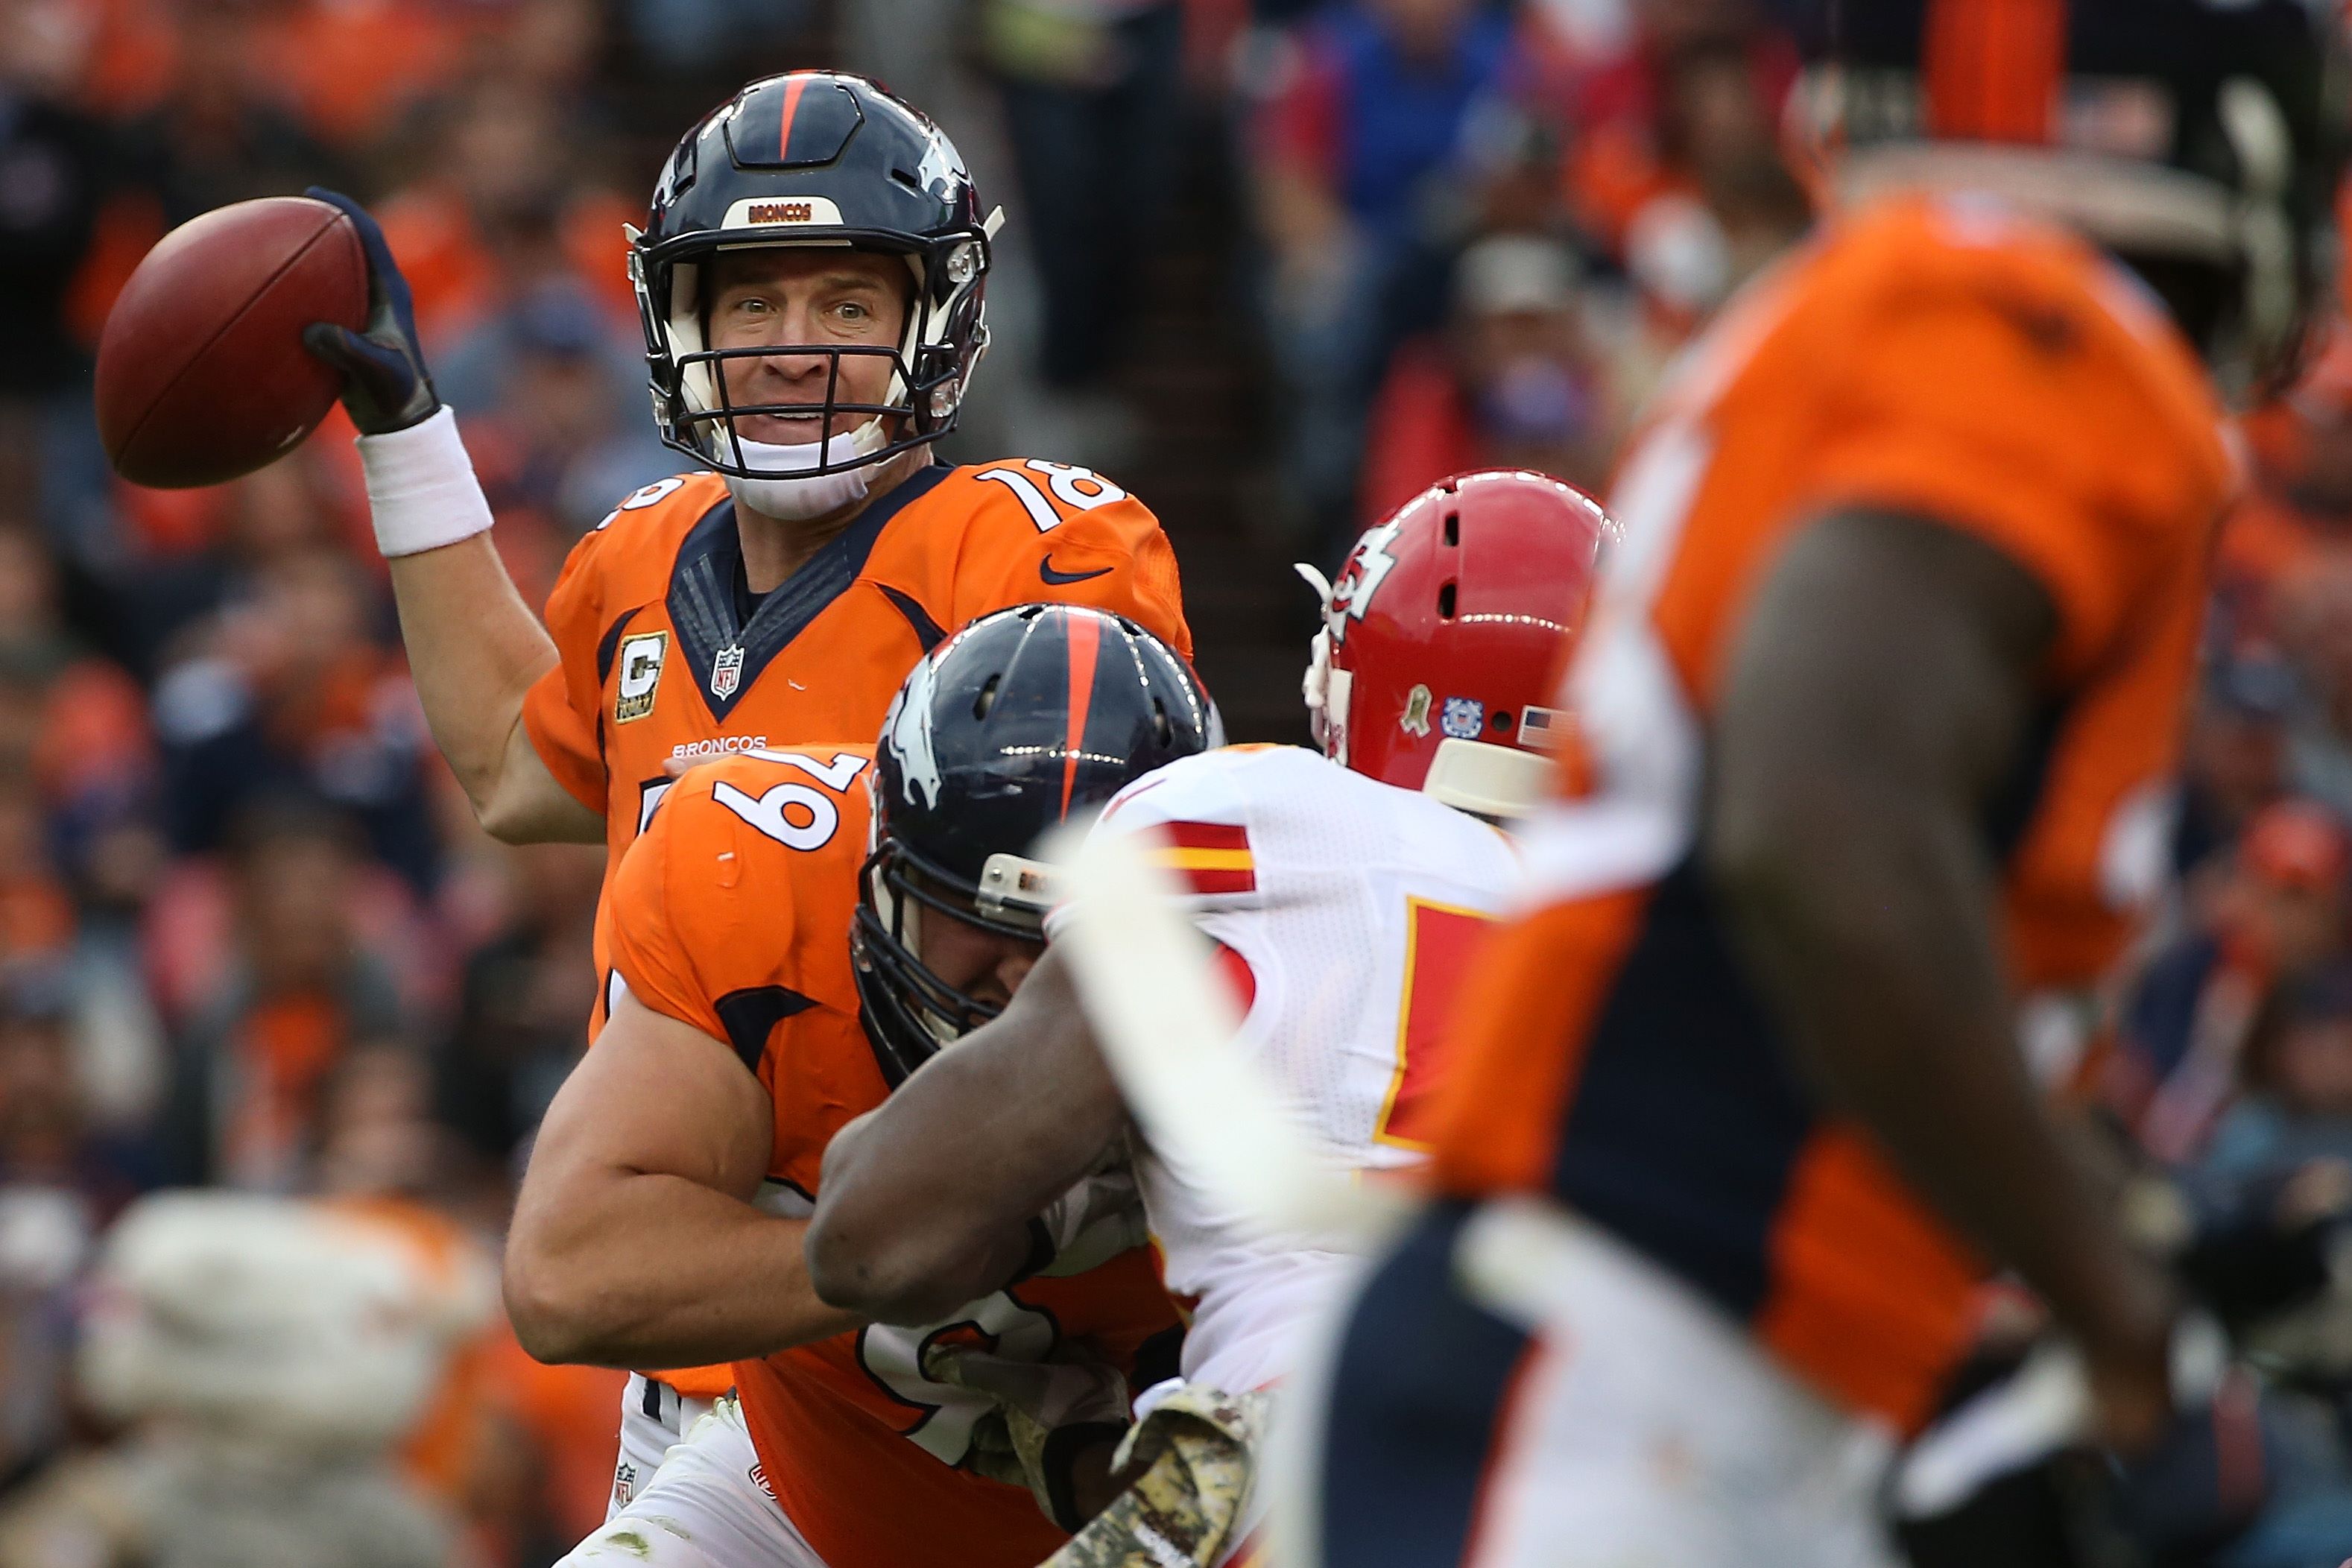 DENVER, CO - NOVEMBER 15: Quarterback Peyton Manning #18 of the Denver Broncos delivers a pass against the Kansas City Chiefs at Sports Authority Field at Mile High on November 15, 2015 in Denver, Colorado. The Chiefs defeated the Broncos 29-13. Doug Pensinger/Getty Images/AFP == FOR NEWSPAPERS, INTERNET, TELCOS & TELEVISION USE ONLY ==